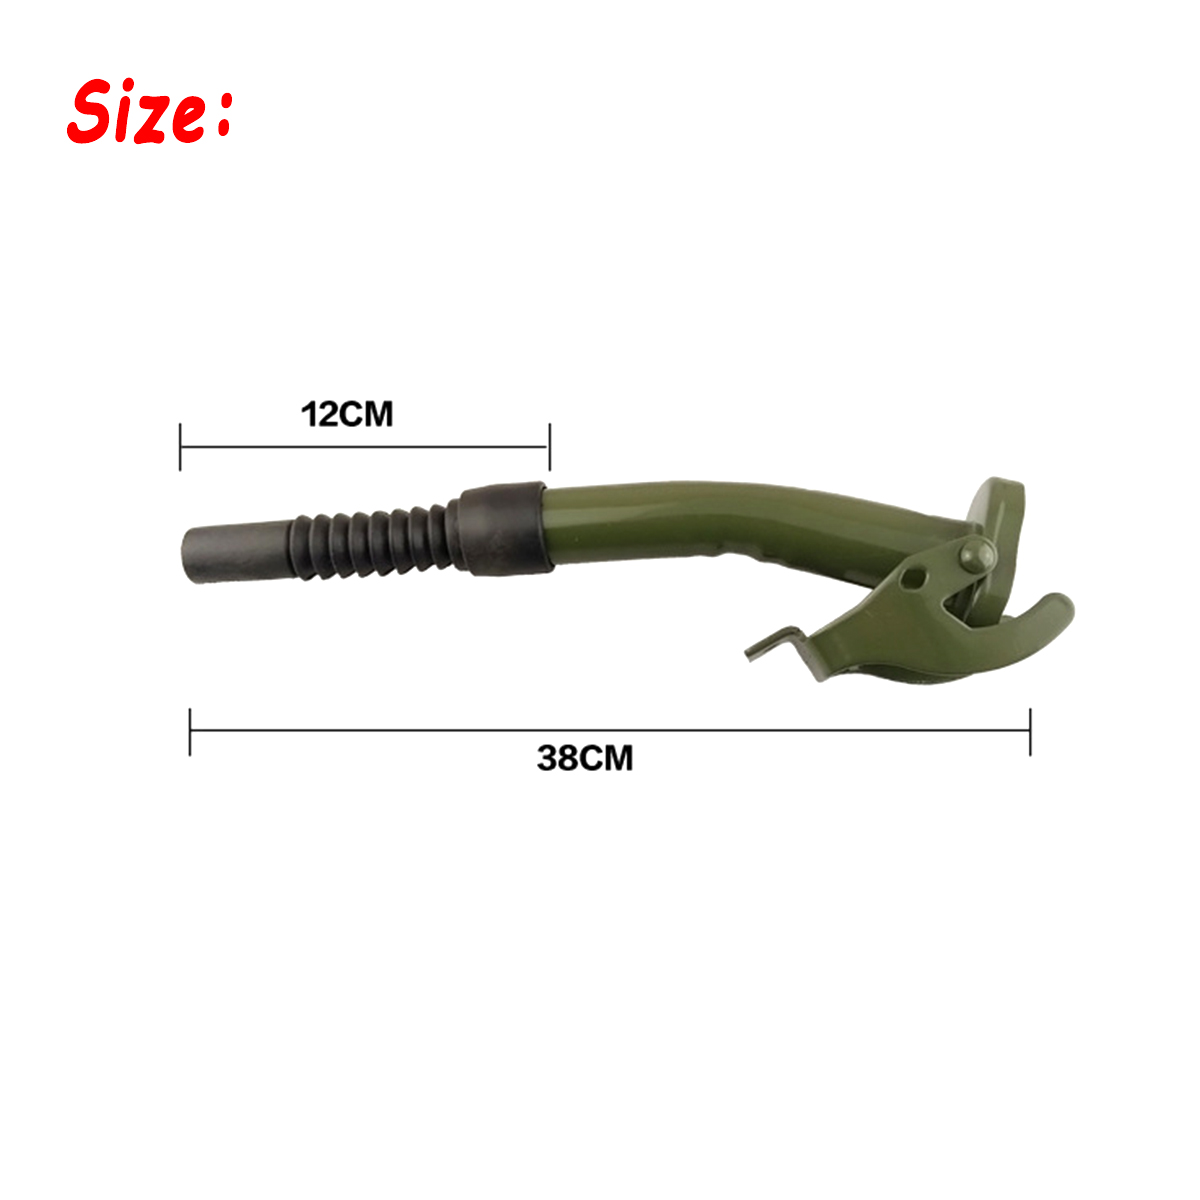 Black-Metal-Jerry-Can-Gas-Canister-Rubber-Nozzle-Spout-Military-Style-Clamp-20L-1600813-3